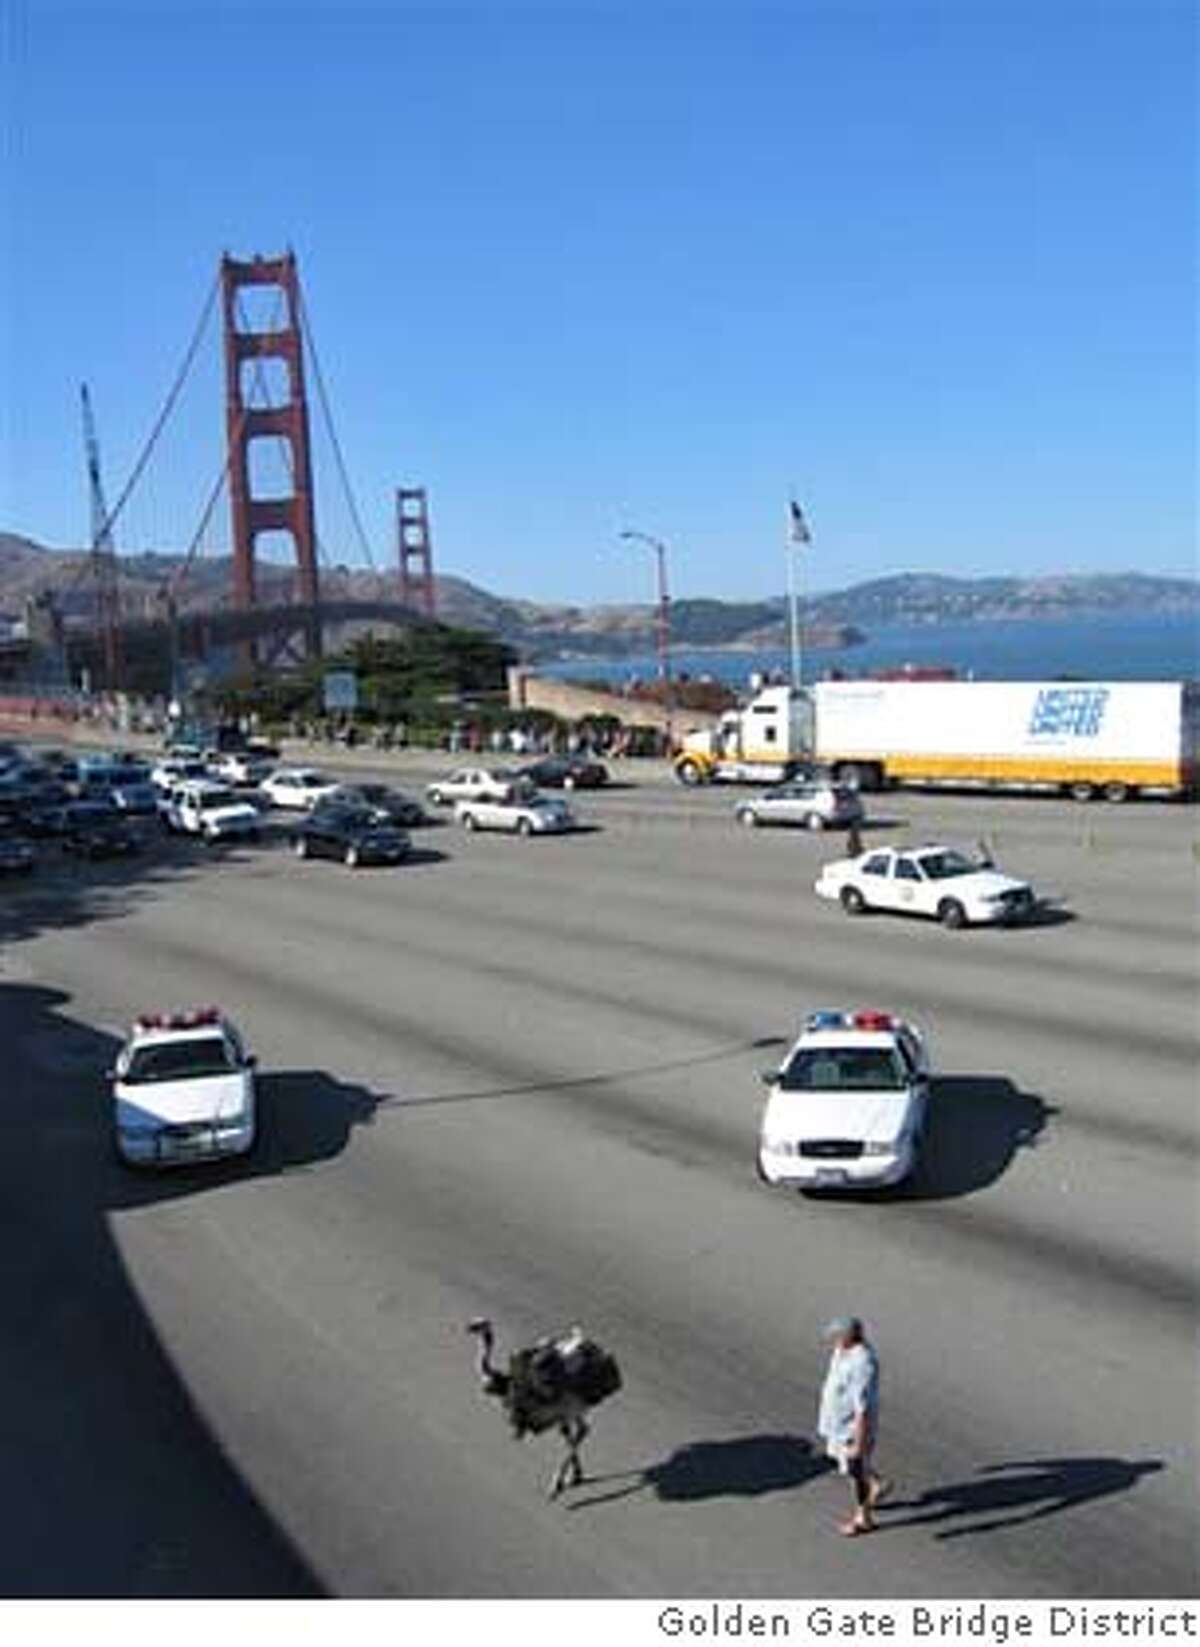 At 4:50 pm today, August 29, 2005, a female Ostrich somehow got out of a minivan heading northbound on the Golden Gate Bridge at the southern end of the Bridge. A second Ostrich did not get out. The owner, male, got of the mini van and began pursuit as the bird traveled southbound toward the toll plaza. The mini van was driven off the Bridge by the passenger in the van after the owner got out. PHOTOS COURTESY OF A. Ko, Golden Gate Bridge District